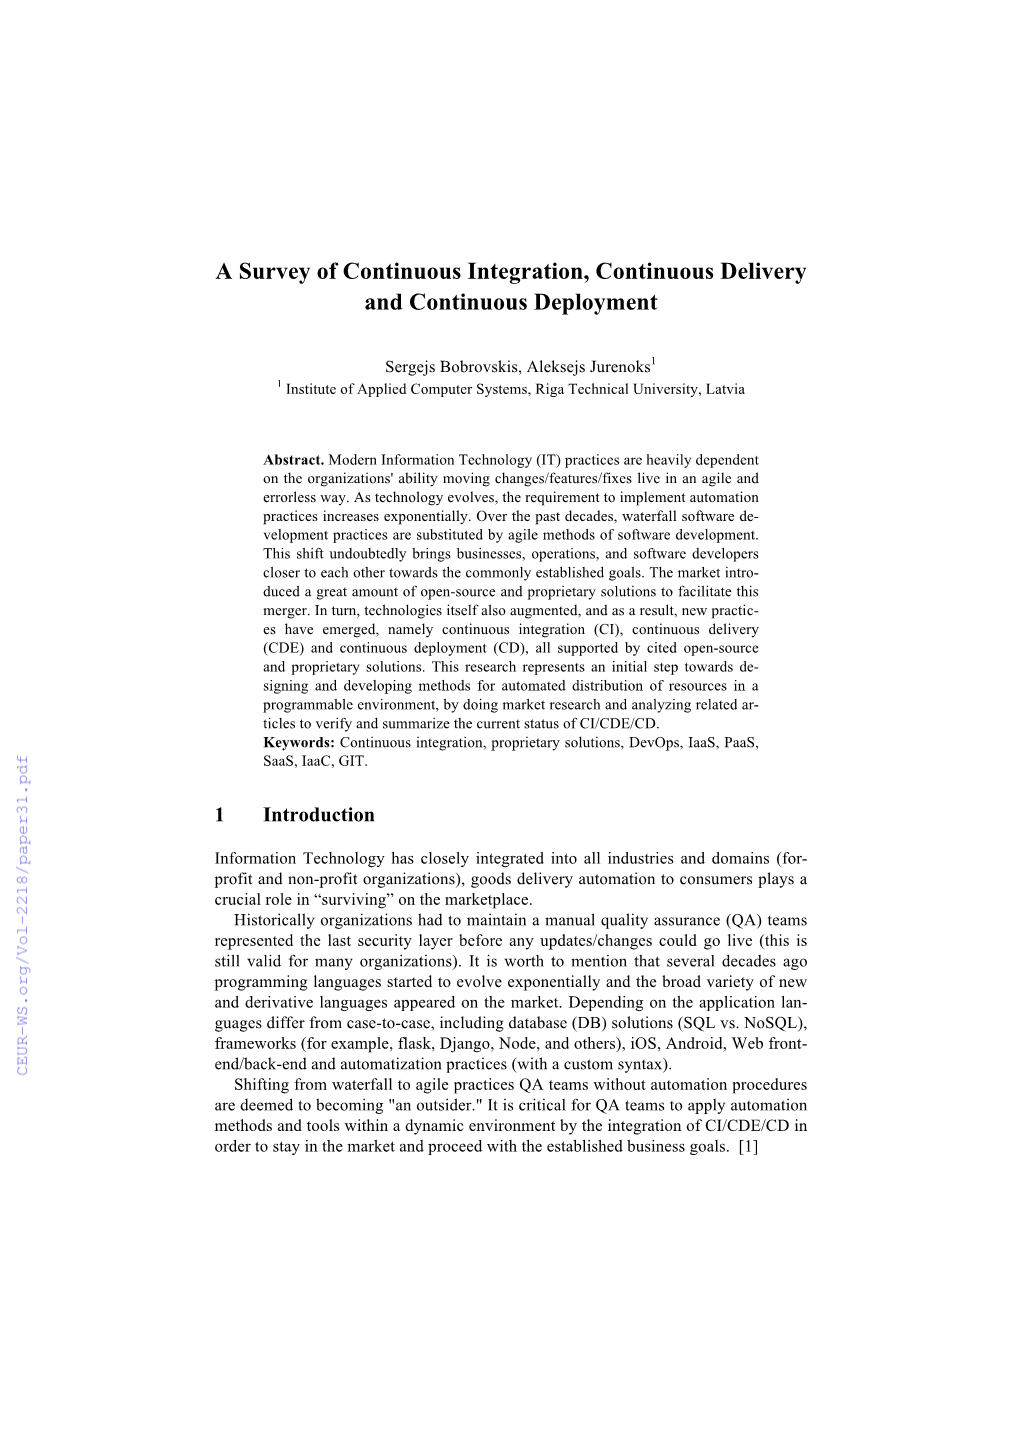 A Survey of Continuous Integration, Continuous Delivery and Continuous Deployment